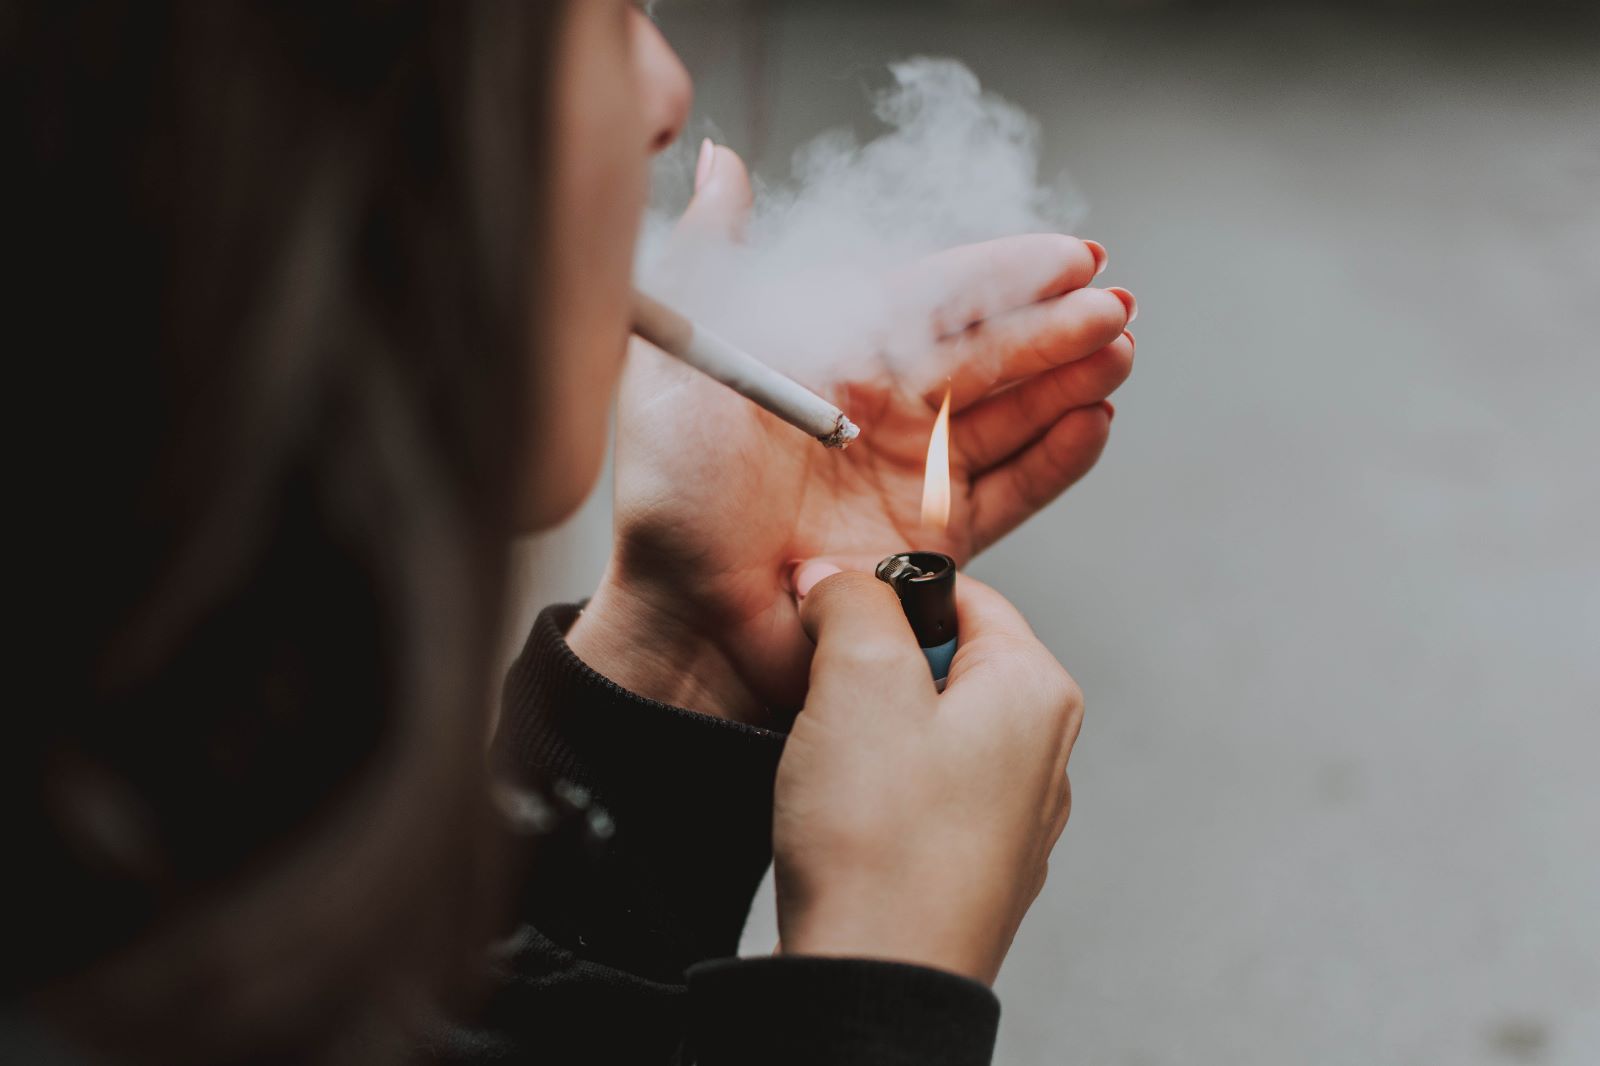 Loneliness
A study by Julianne Holt-Lunstad, Professor of Psychology at Brigham Young University, has revealed that loneliness can be as damaging to human life as smoking 15 cigarettes a day.